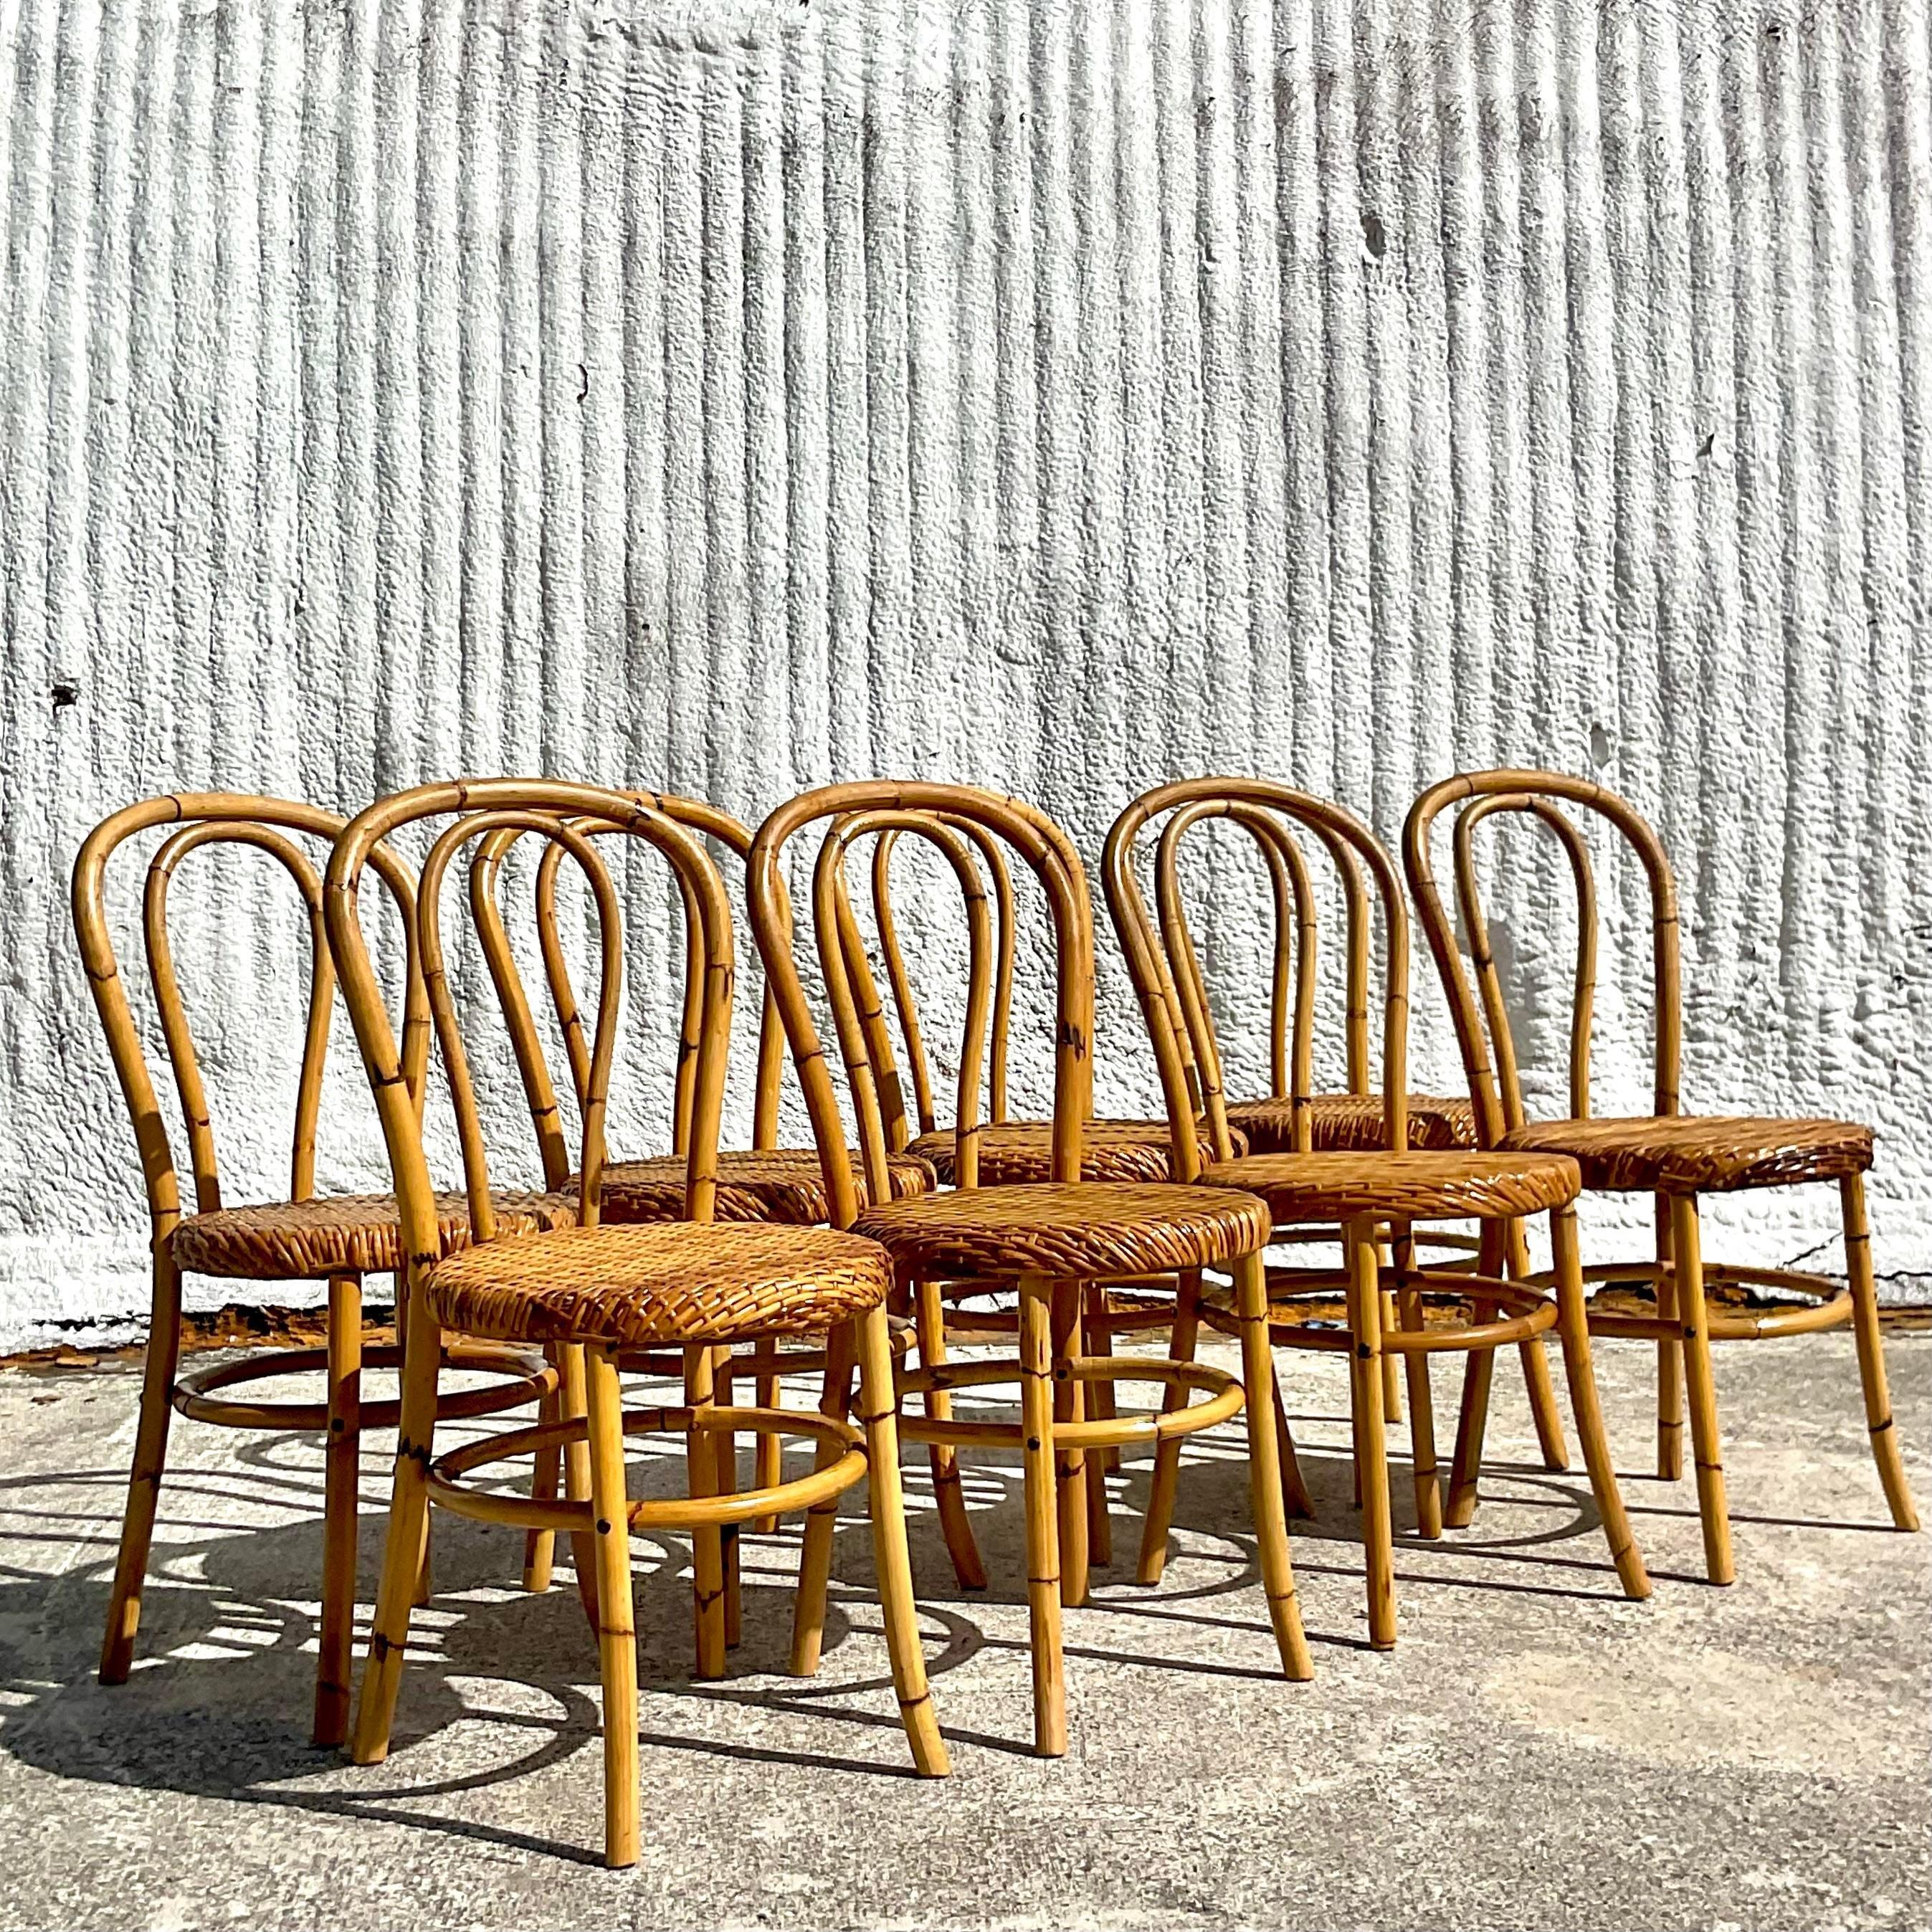 20th Century Vintage Coastal Rare McGuire Bent Bamboo Dining Chairs - Set of 8 For Sale